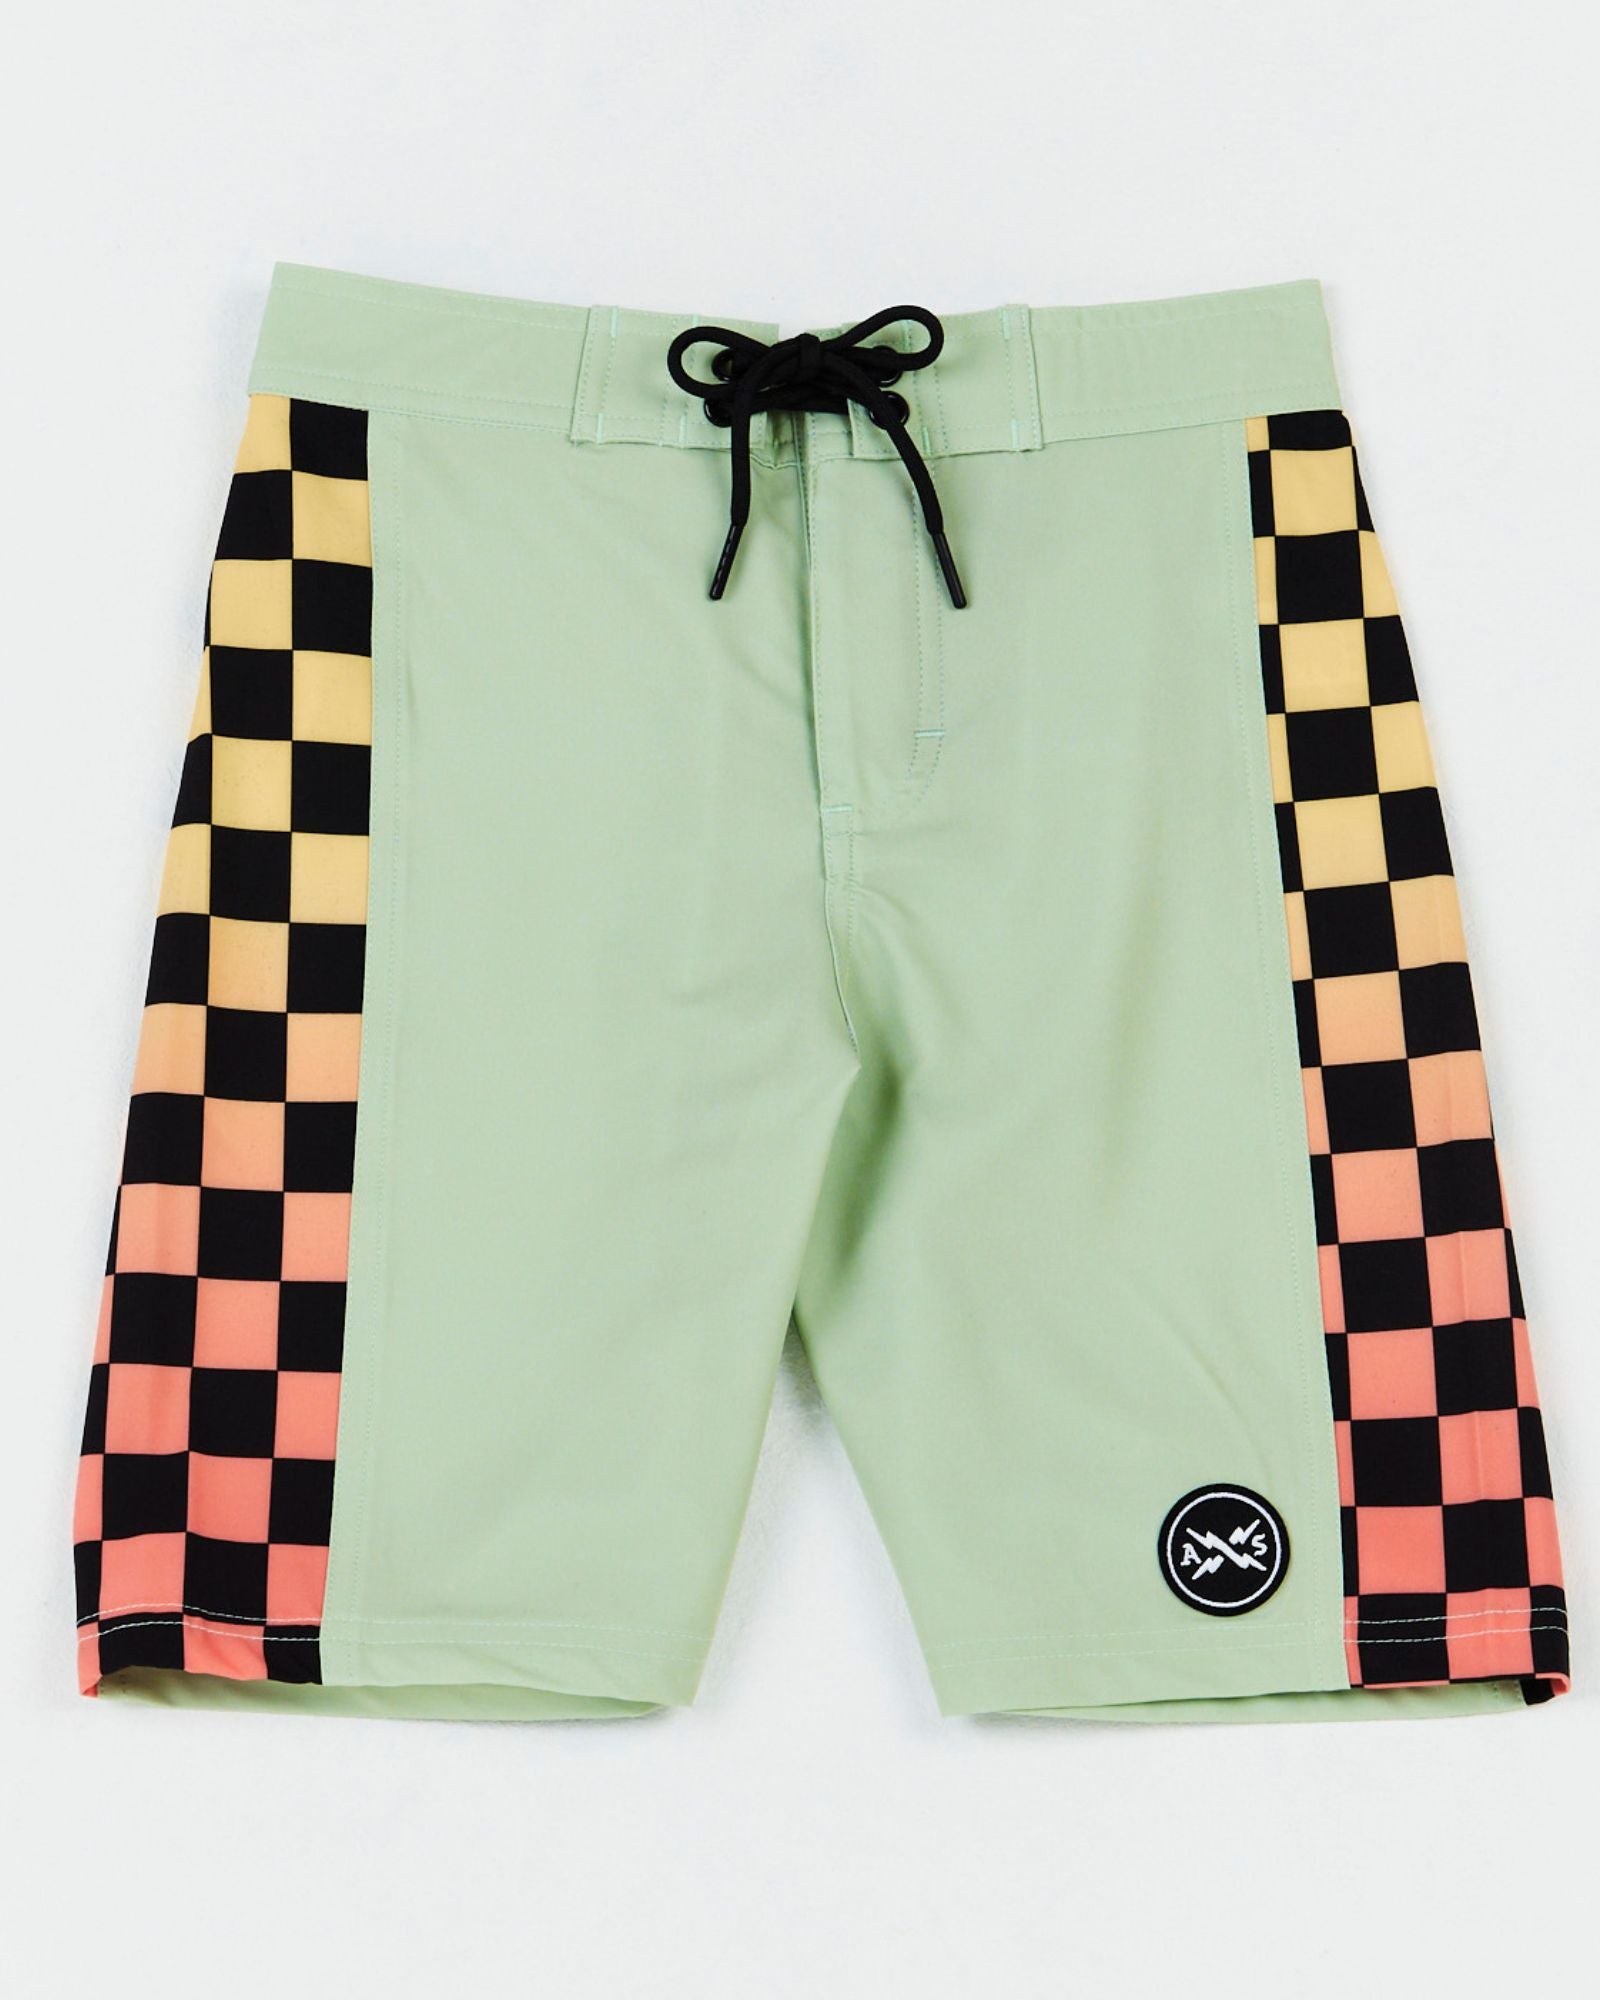 Alphabet Soup’s Kids Eat My Dust boardshort for boys aged 2-7, featuring a quick-dry 4-way stretch fabric featuring a double eyelet waist drawstring, elasticized back waist, checkered fade print, side panel detail, and a velcro-fastened back pocket with logo badge.